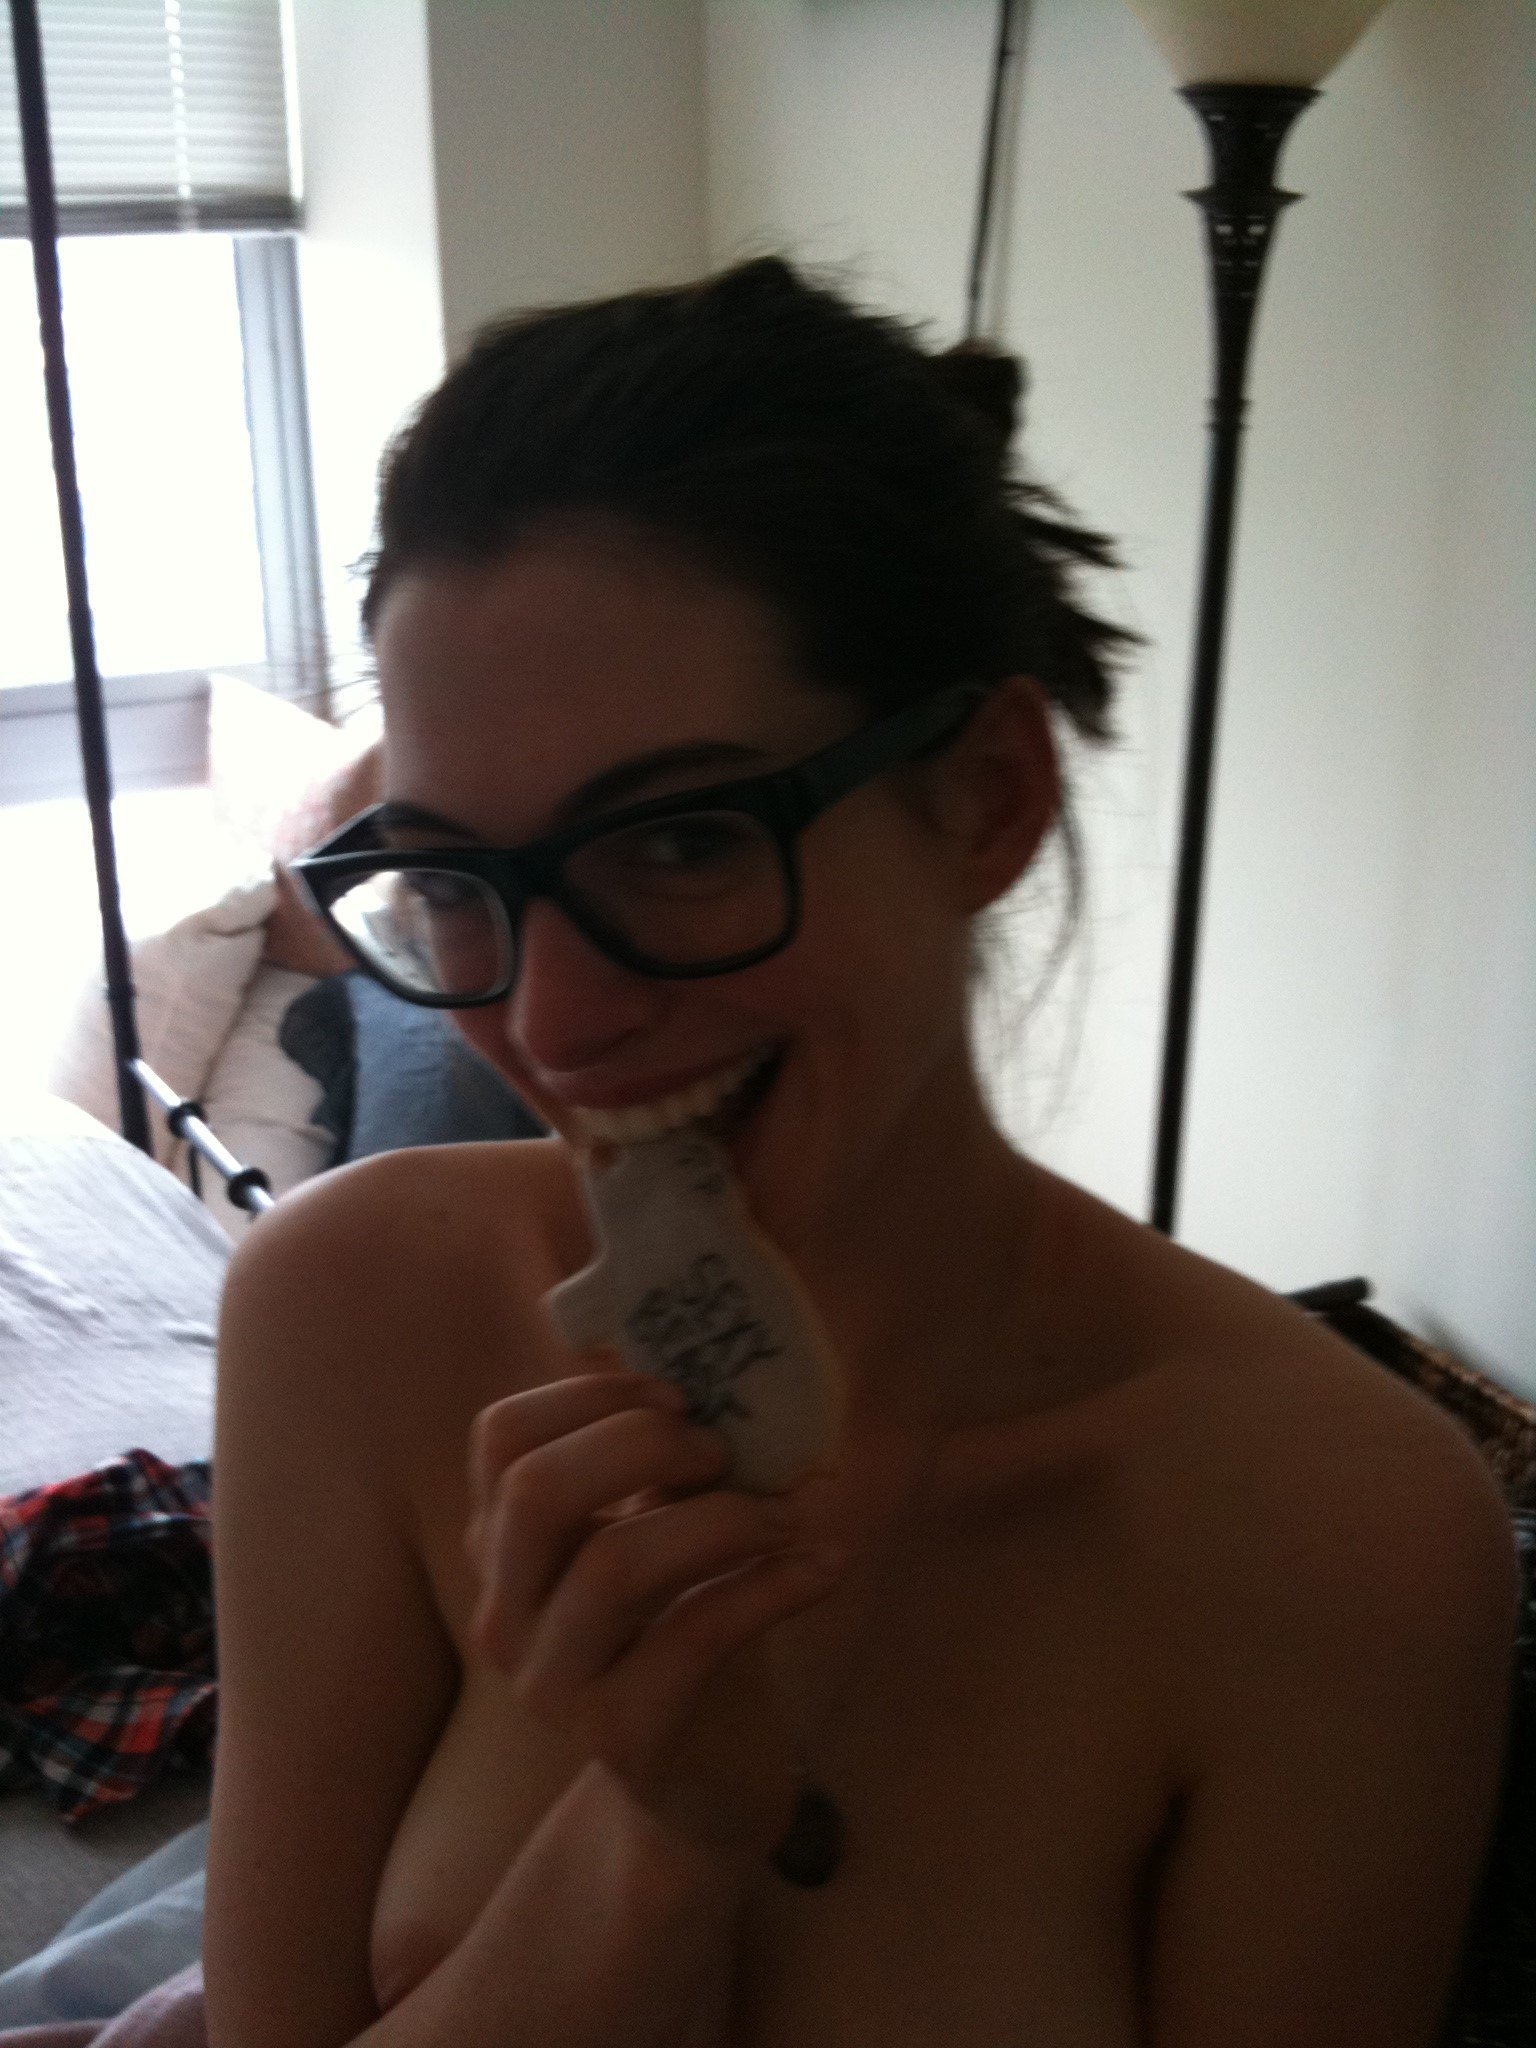 New Pics ] Anne Hathaway Fappening LEAK! (Full Collection) – Leaked Pie